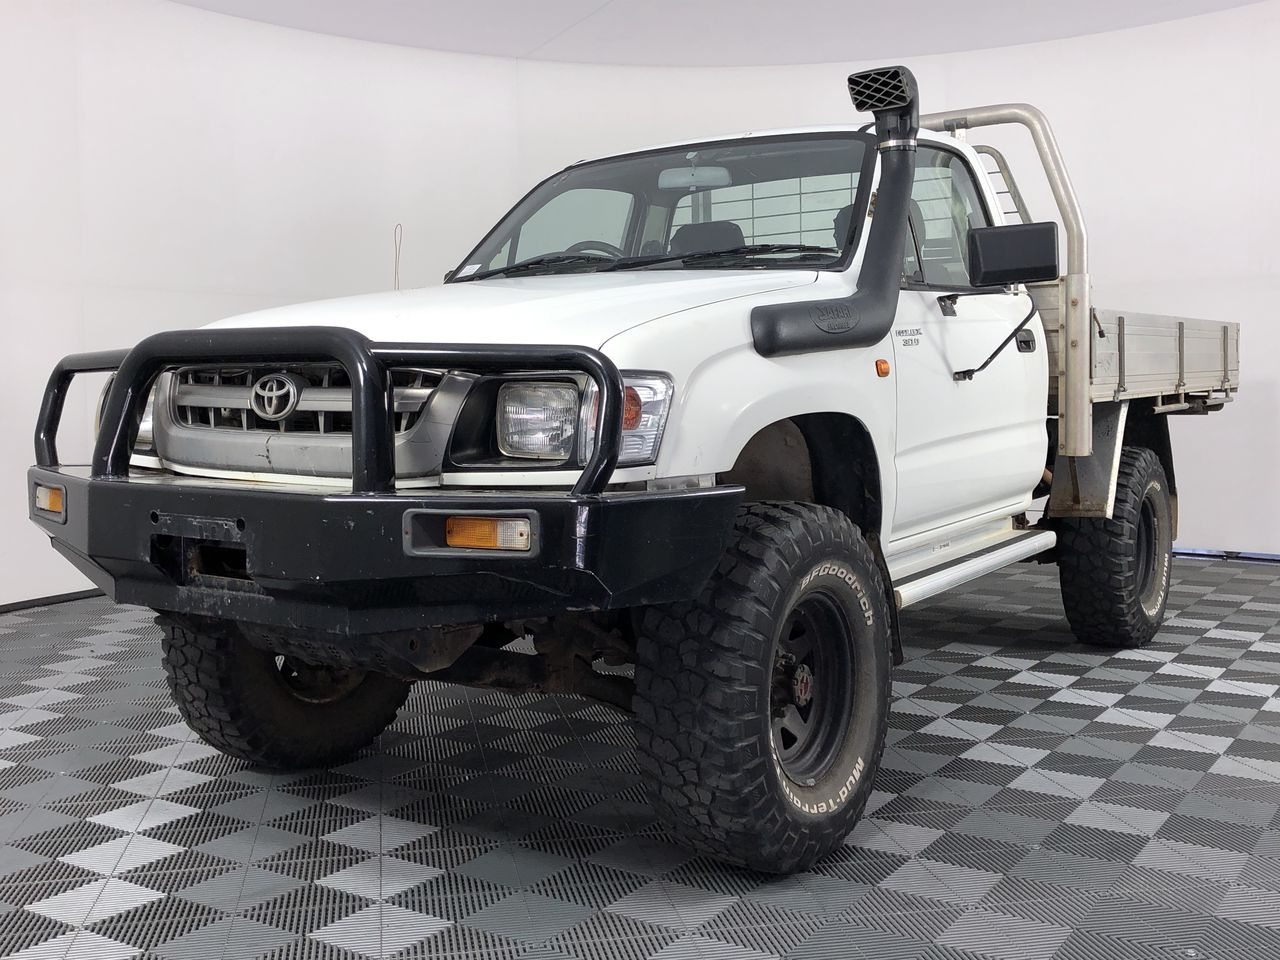 2004 Toyota Hilux 4x4 Manual Cab Chassis Wovr Auction 0001 7743362